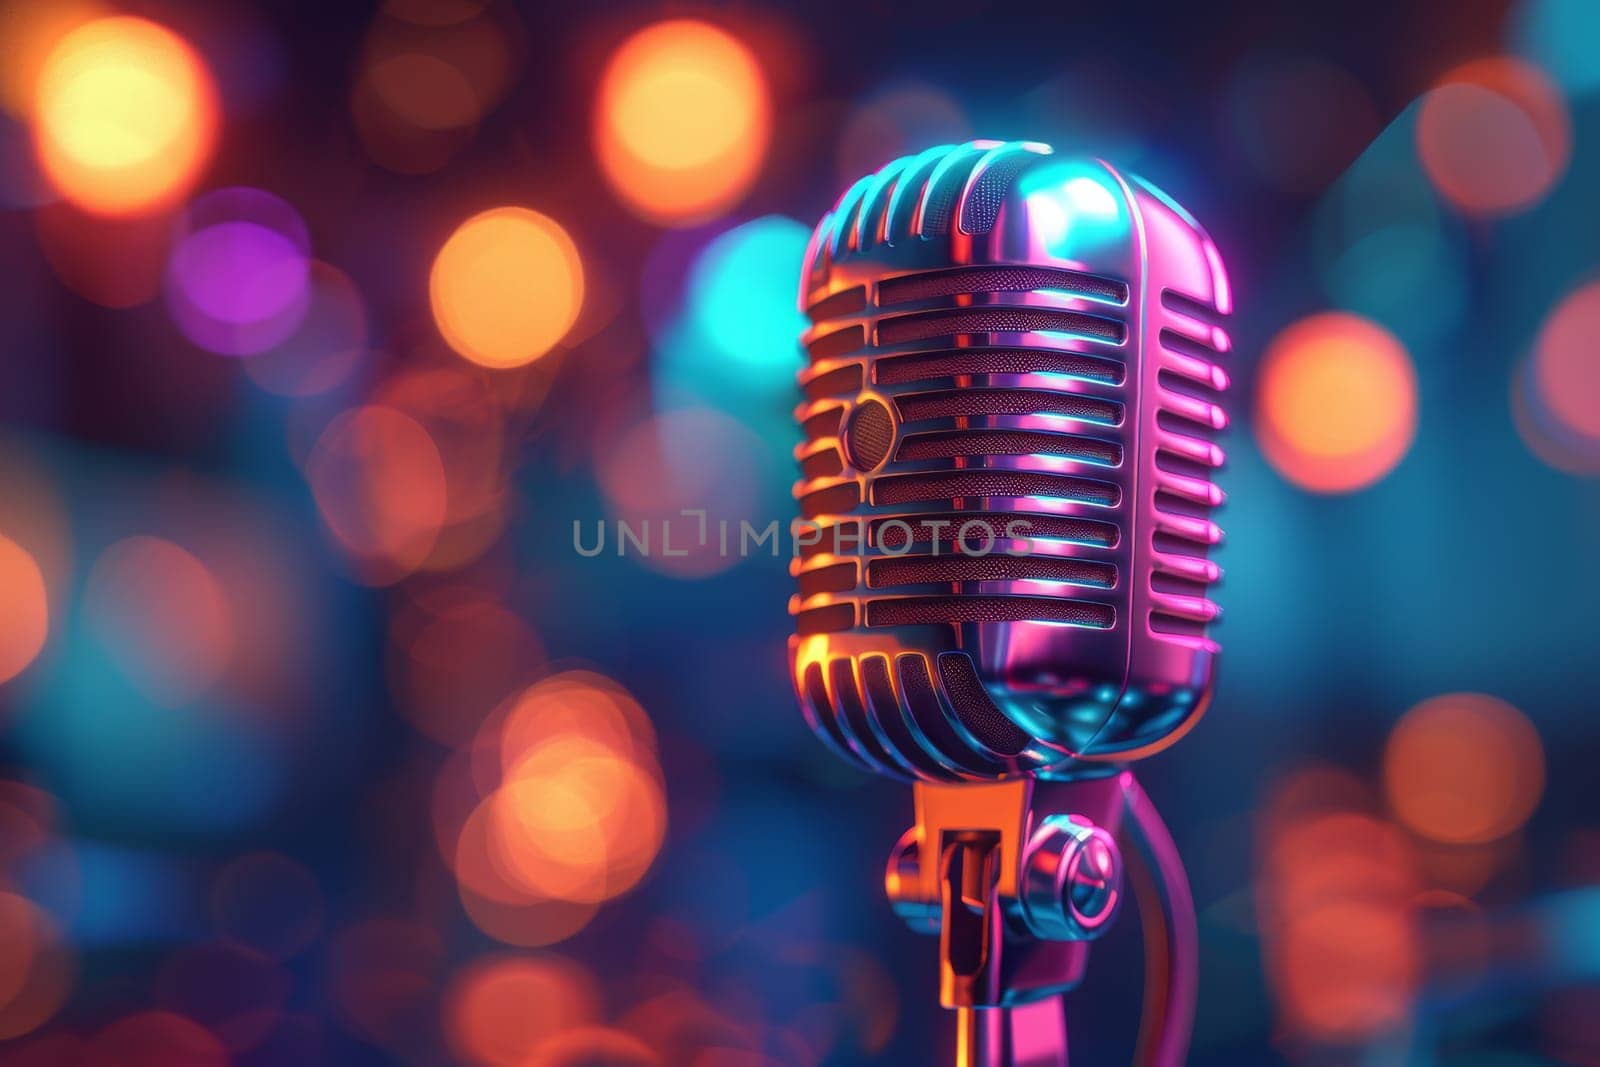 A microphone is on a colorful background. The microphone is silver and has a black cord. The background is a mix of colors, giving the image a lively and energetic feel